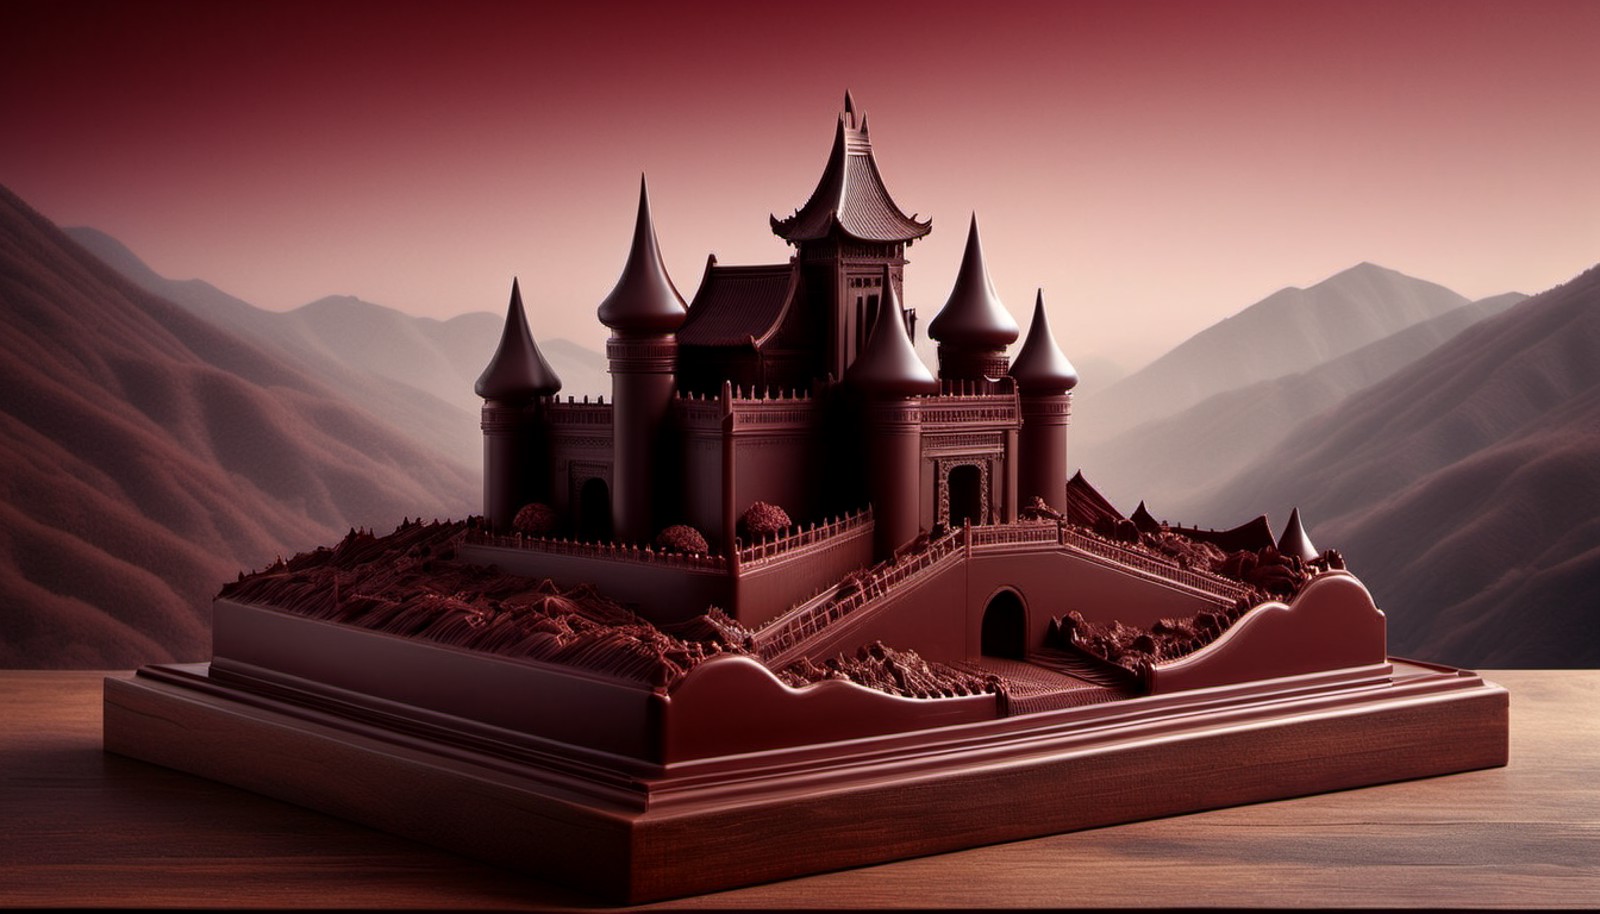 ChocolateRay, landscape of a Dreamy Juyongguan Pass, it is dressed in Neogothic Art fashion style made entirely of chocola...